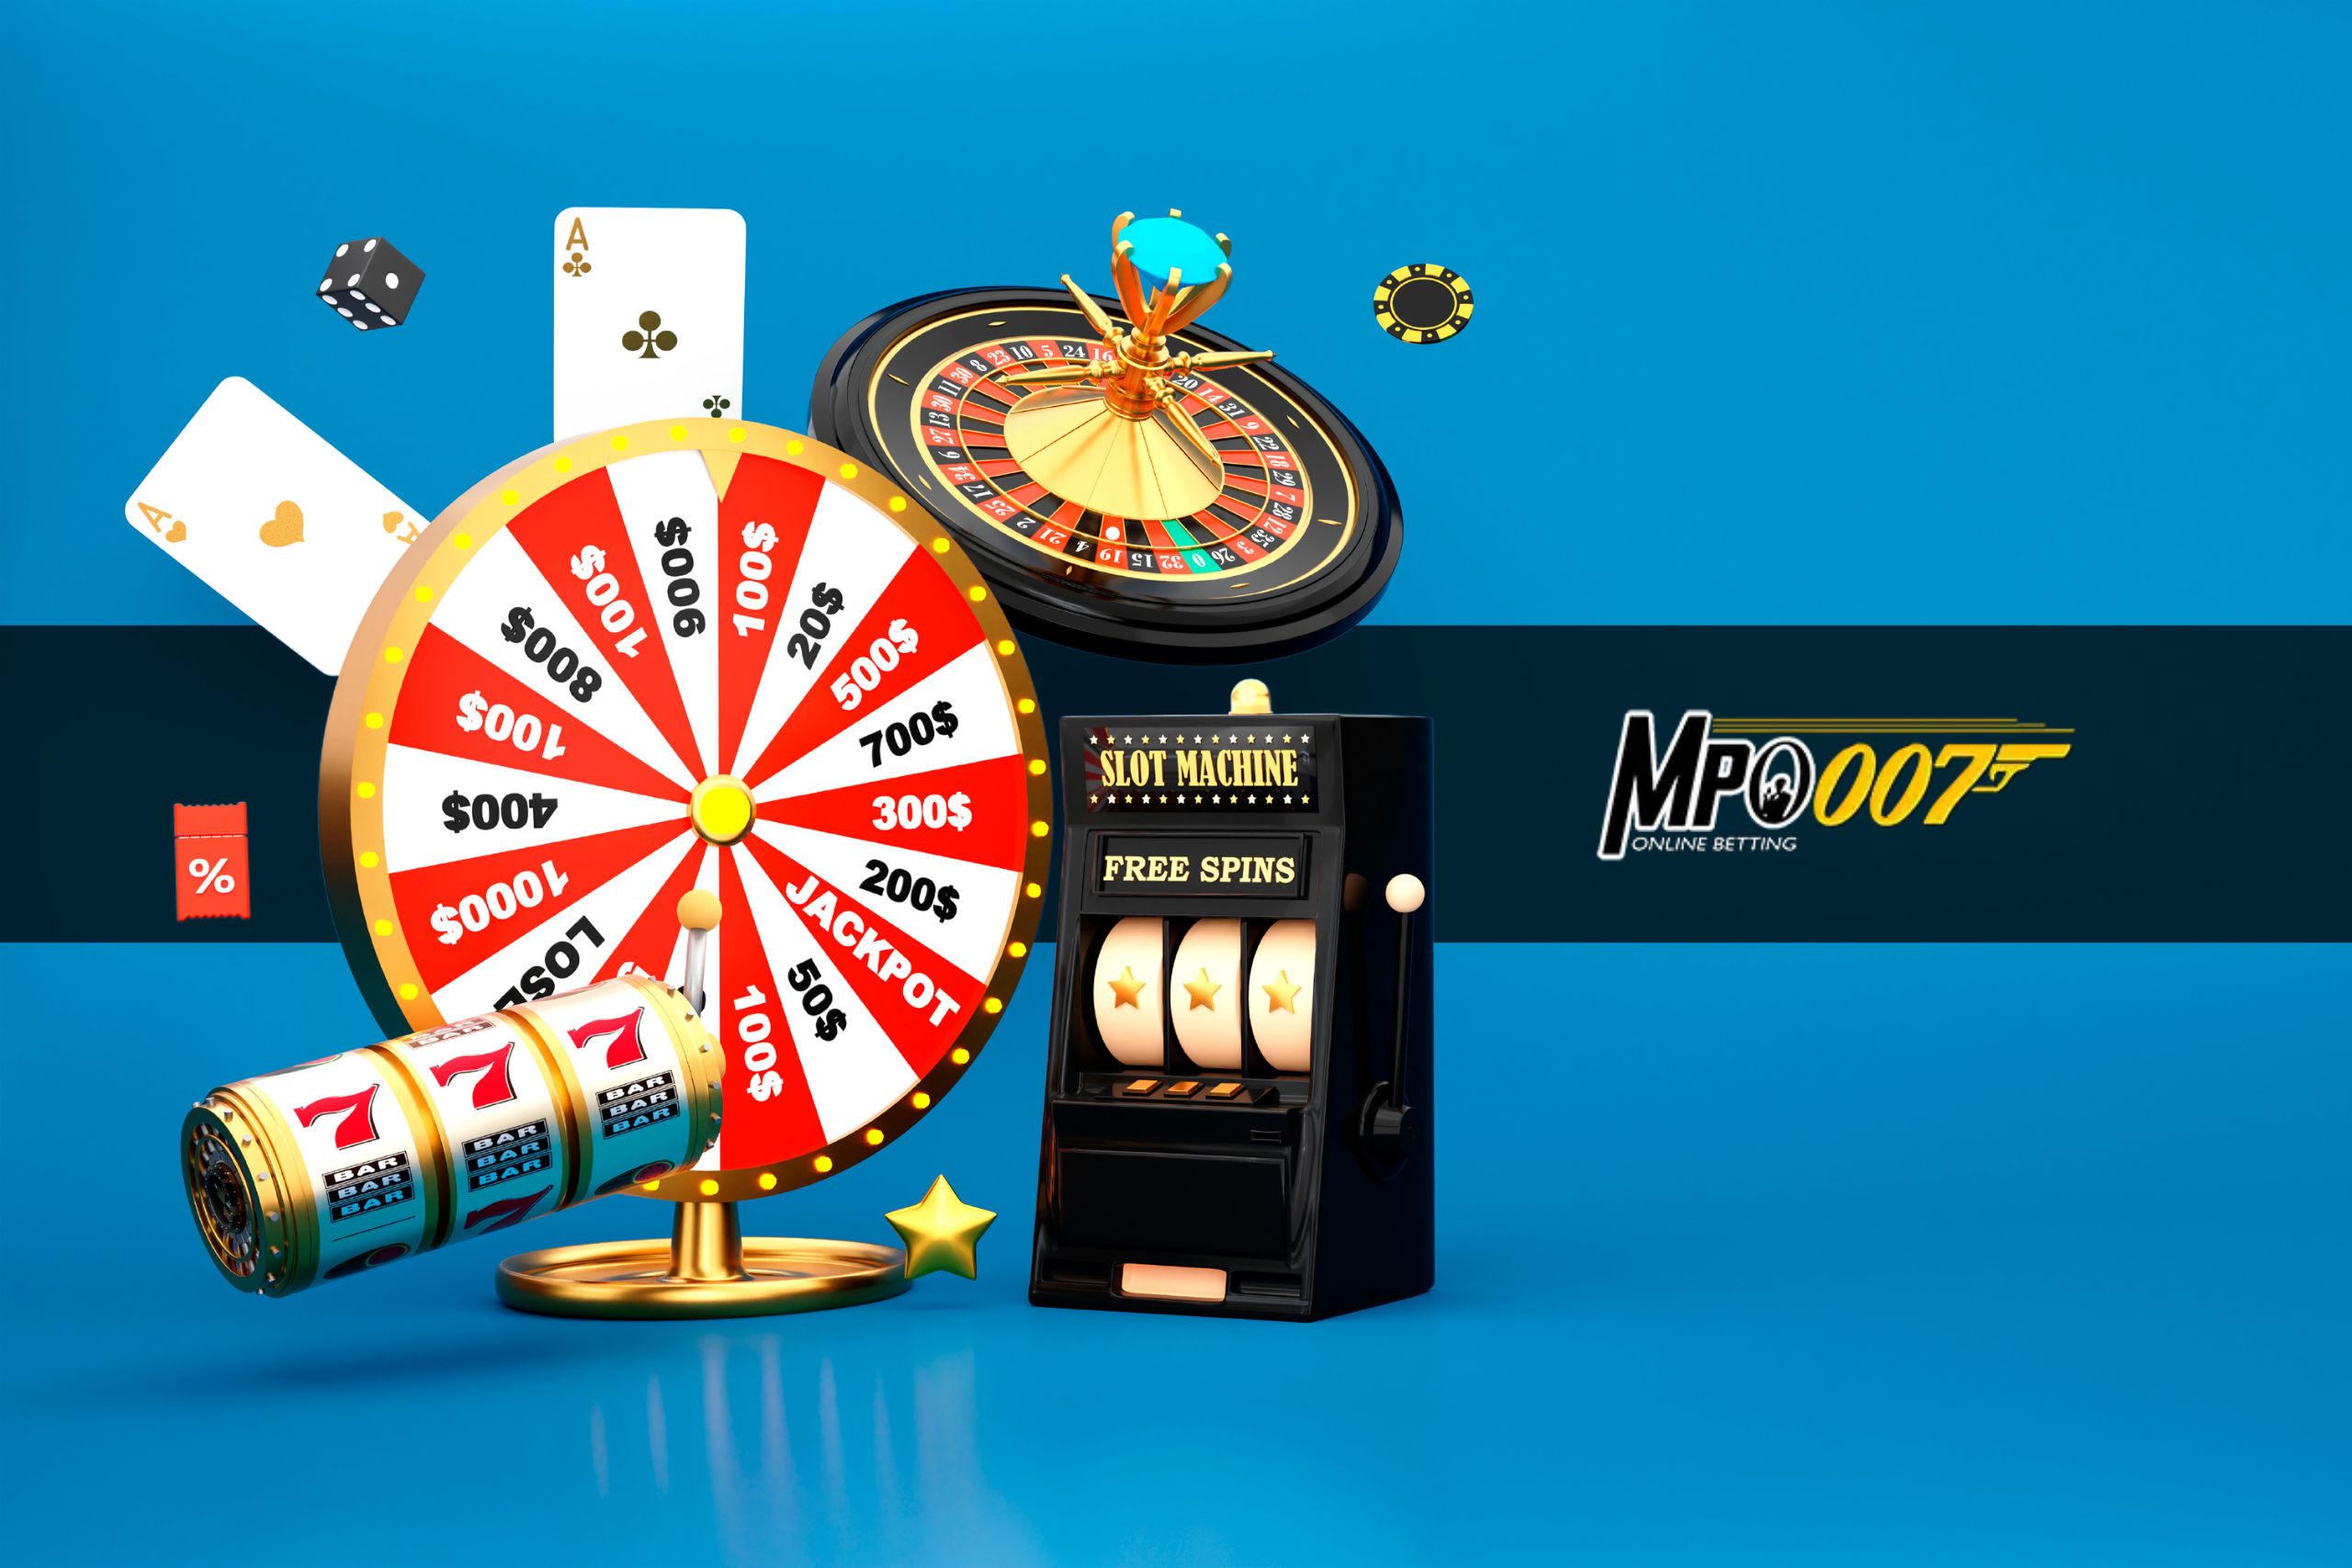 MPO007 Online Casino: A Trusted Platform For Safe And Secure Gambling